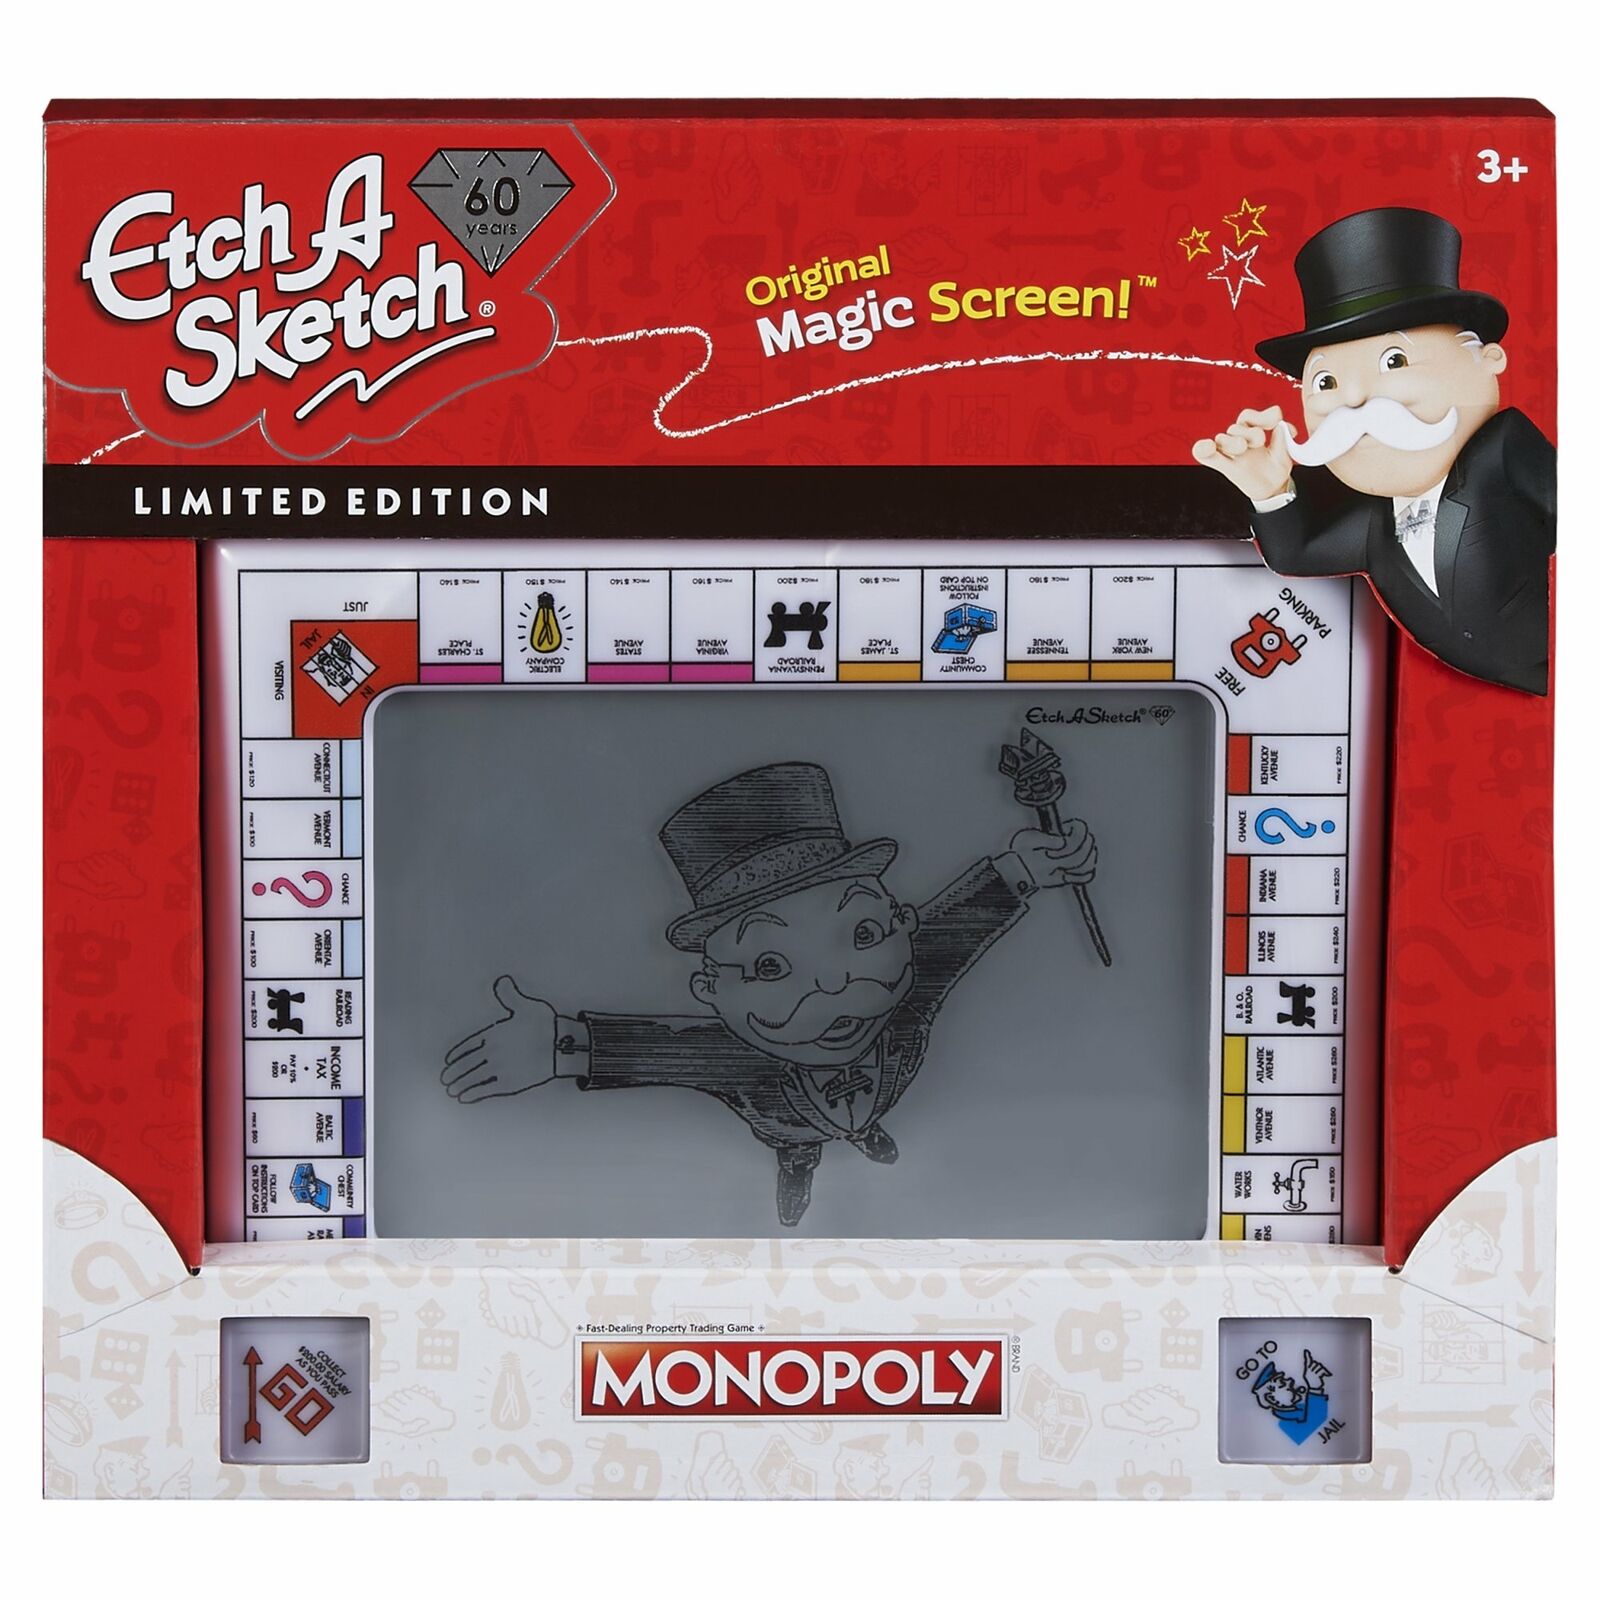 Etch A Sketch Classic Monopoly Themed Drawing Toy with Magic Screen